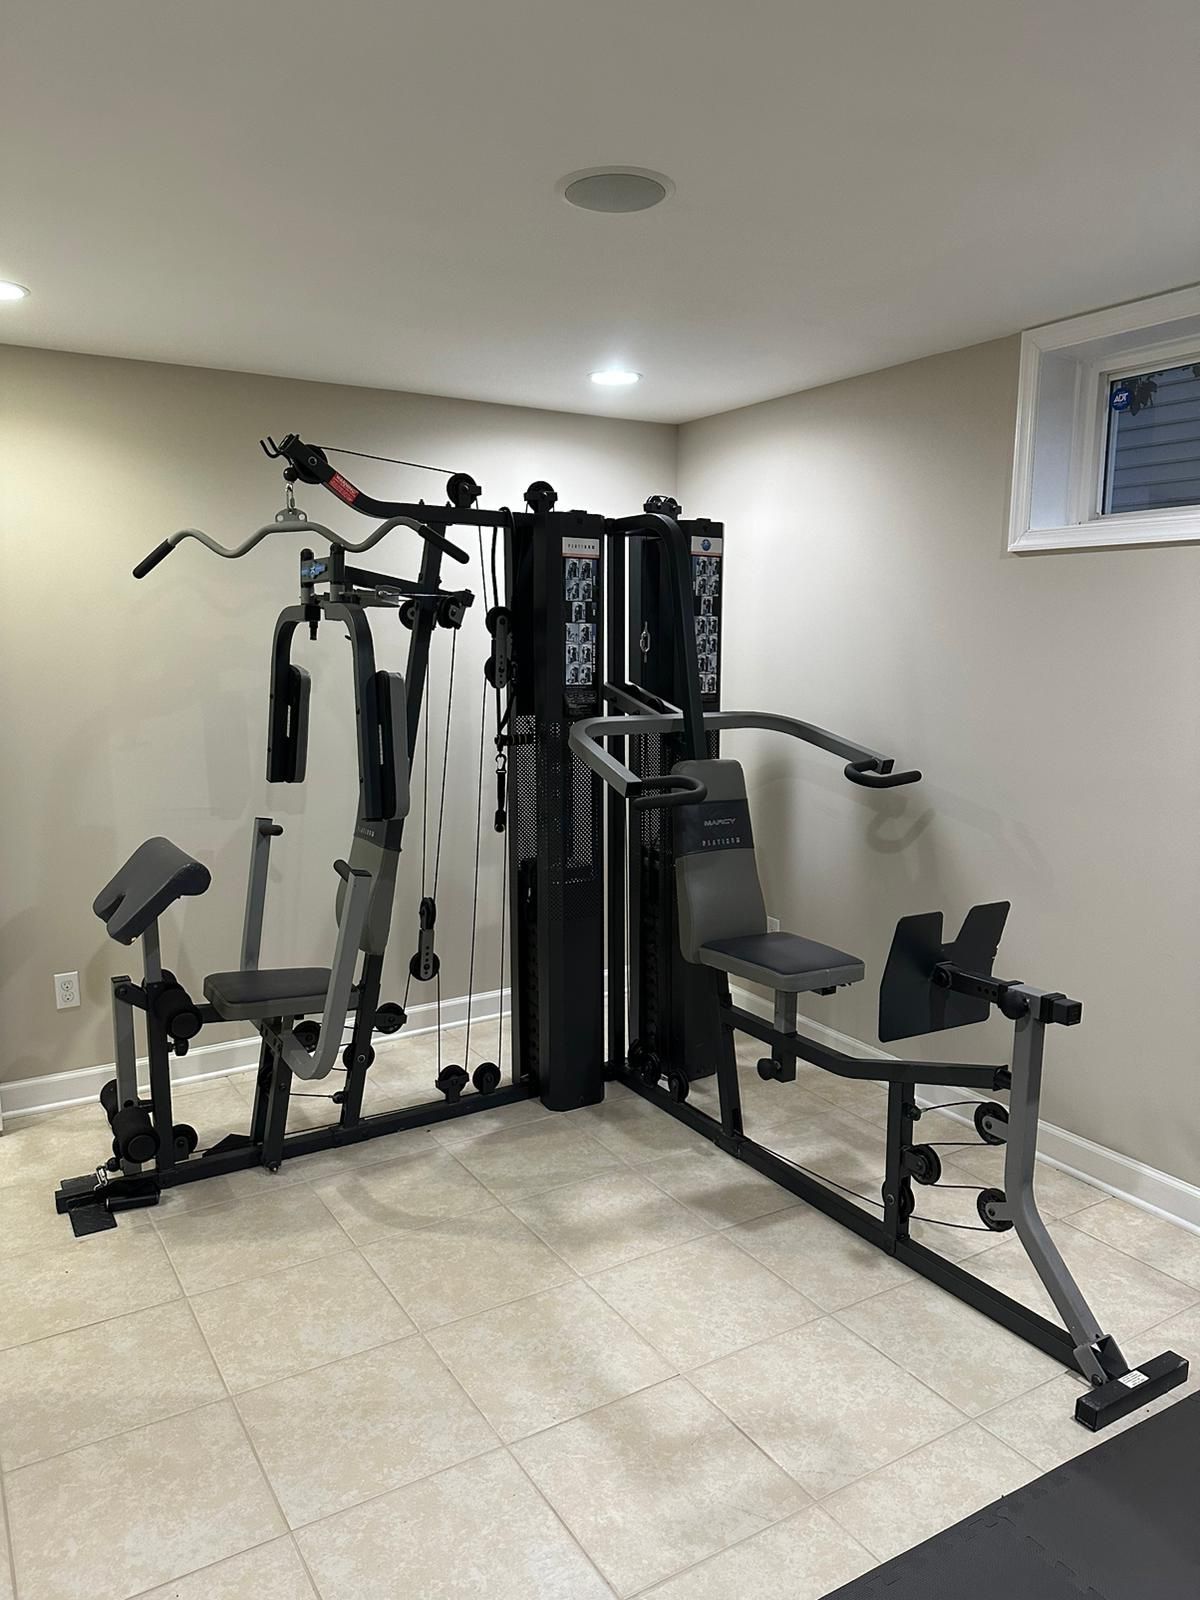 The Marcy GS99 Dual Stack Multi Gym